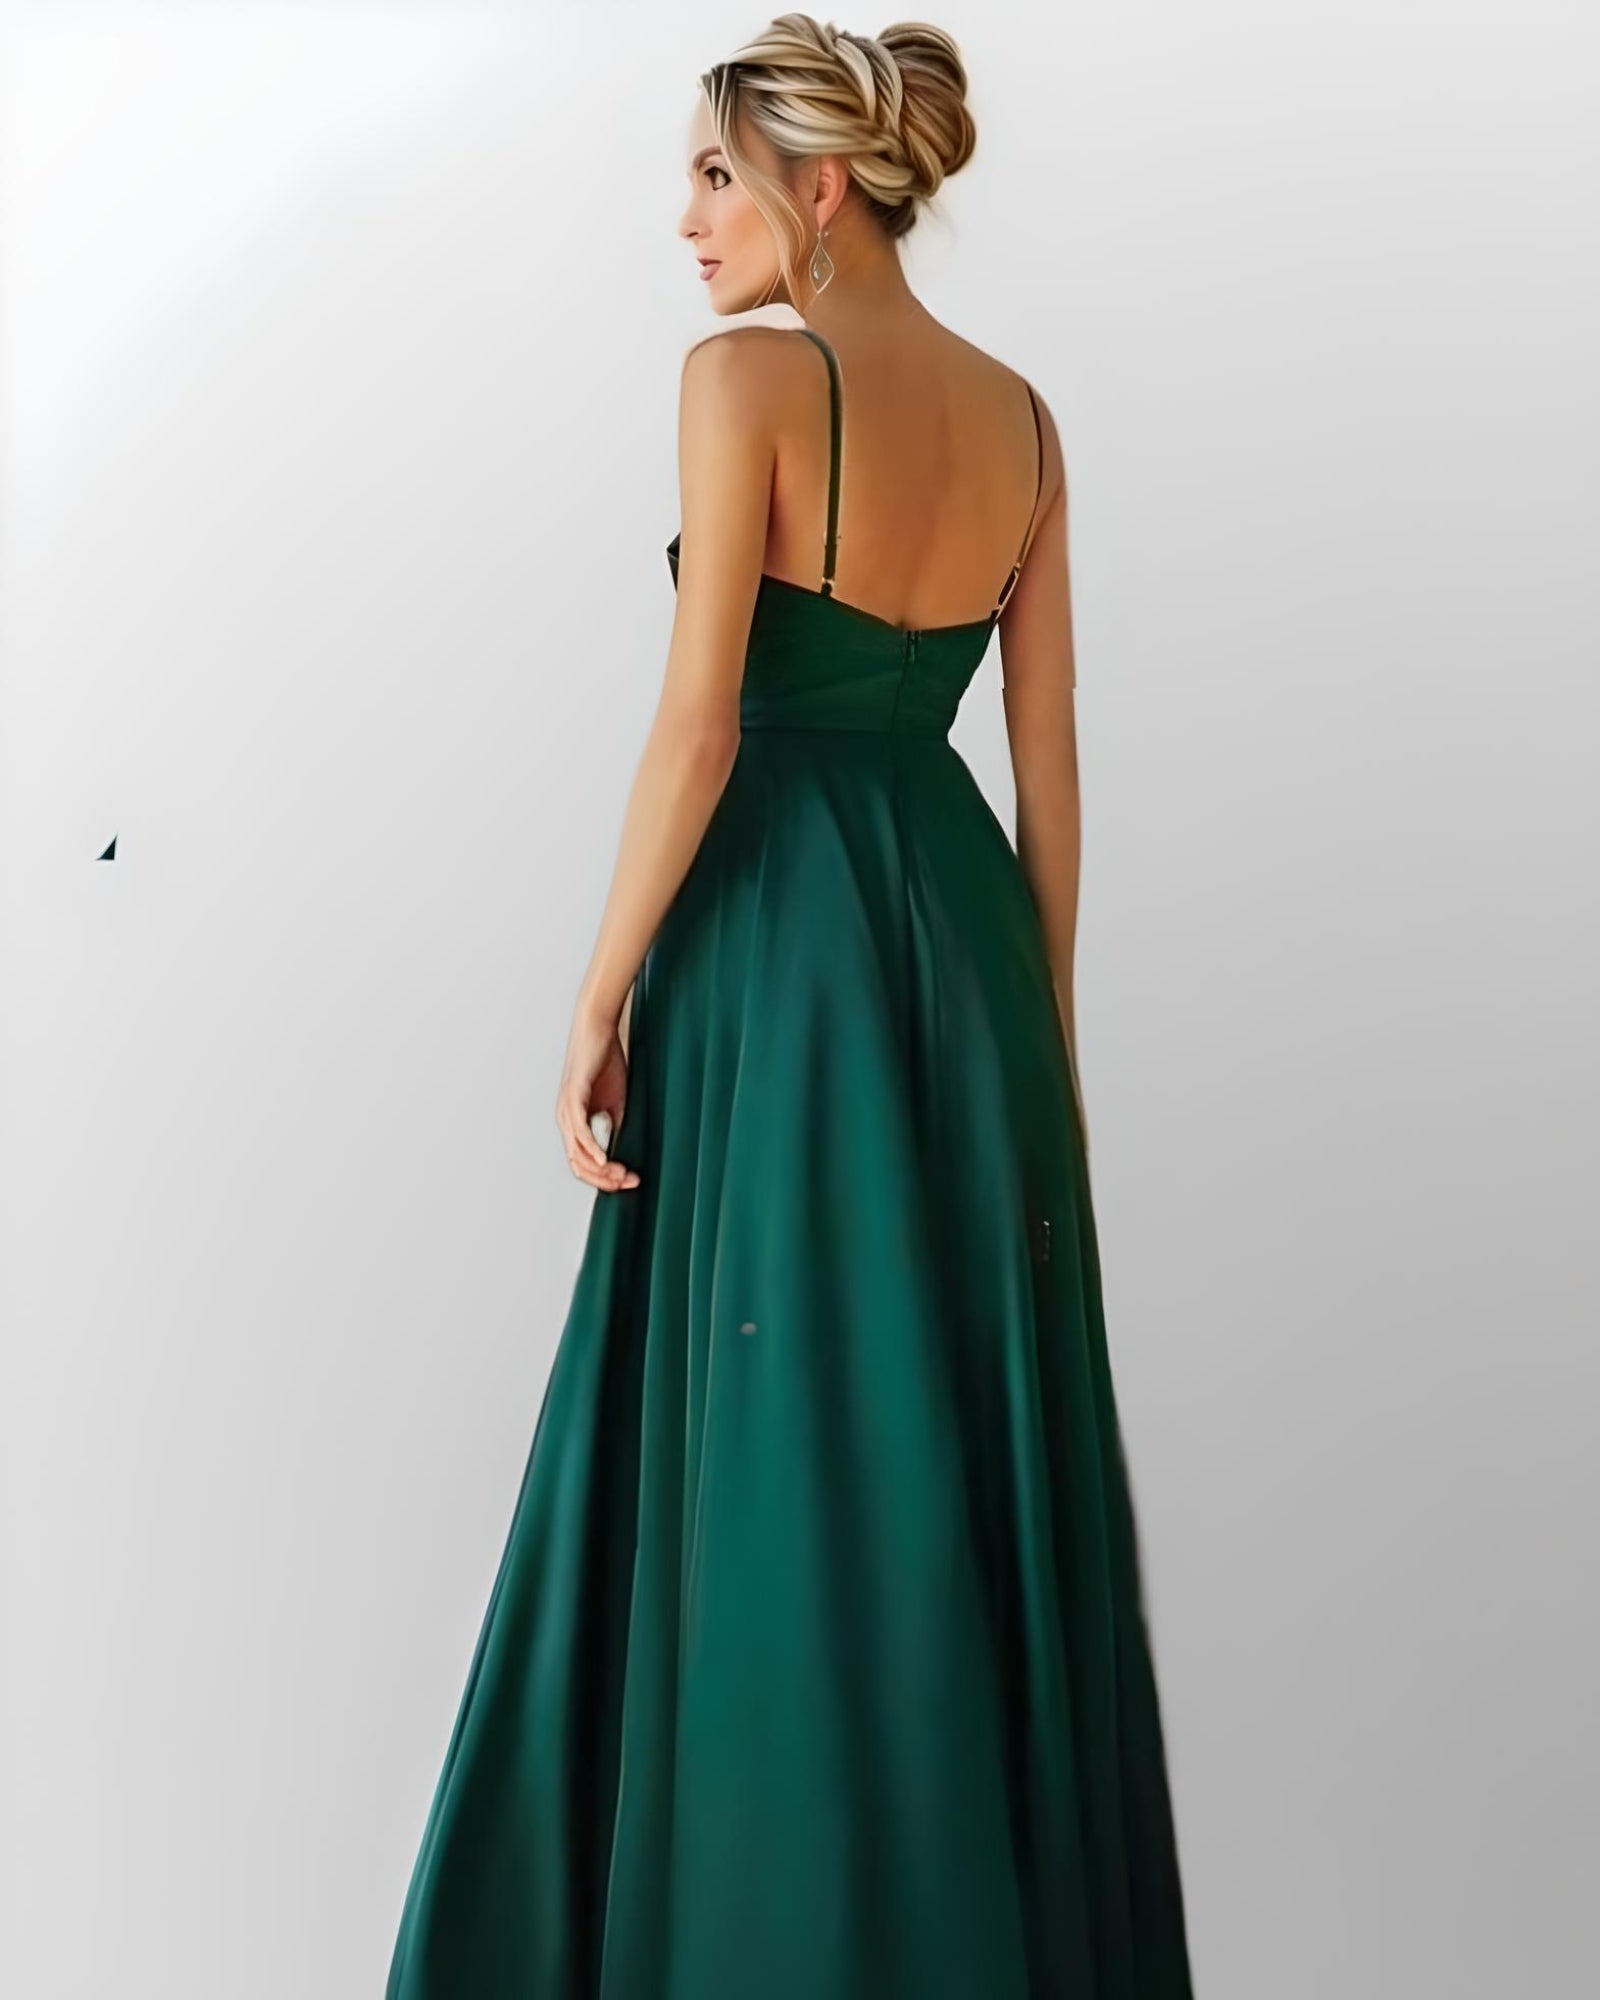 Blond woman in backless emerald green prom gown.